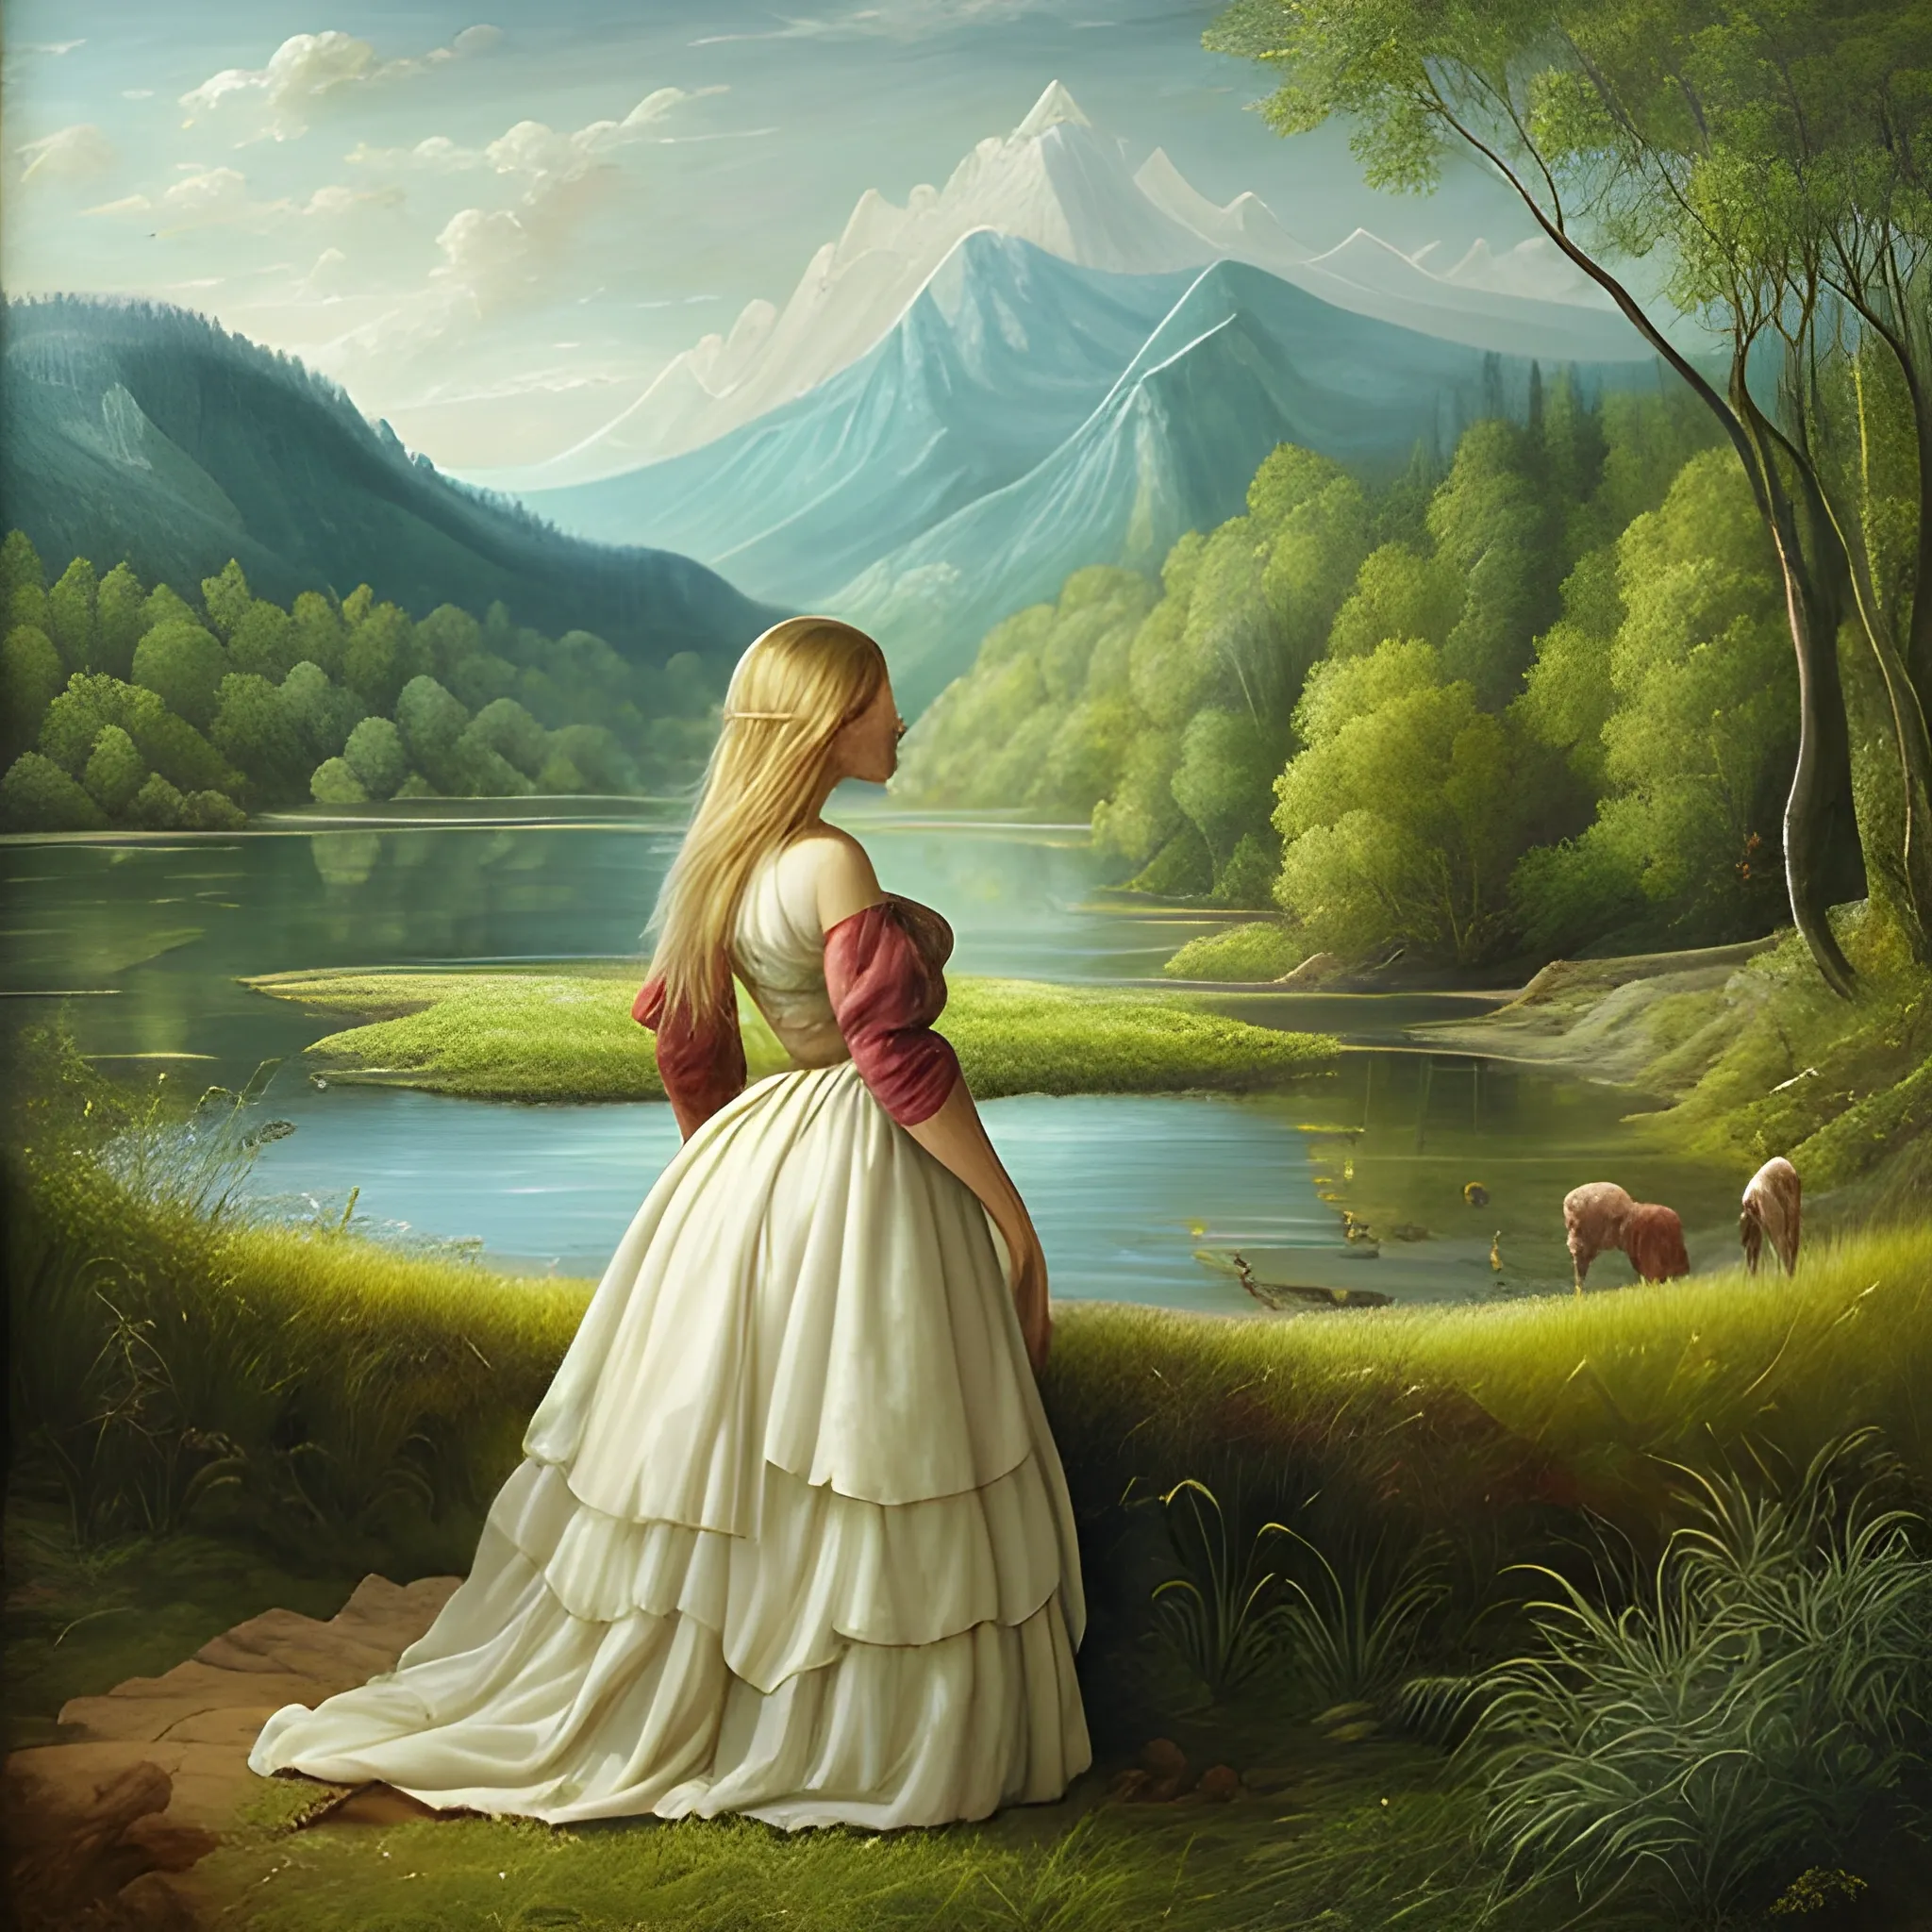 painting a landscape with full nature elements and a woman to be there as part of it
